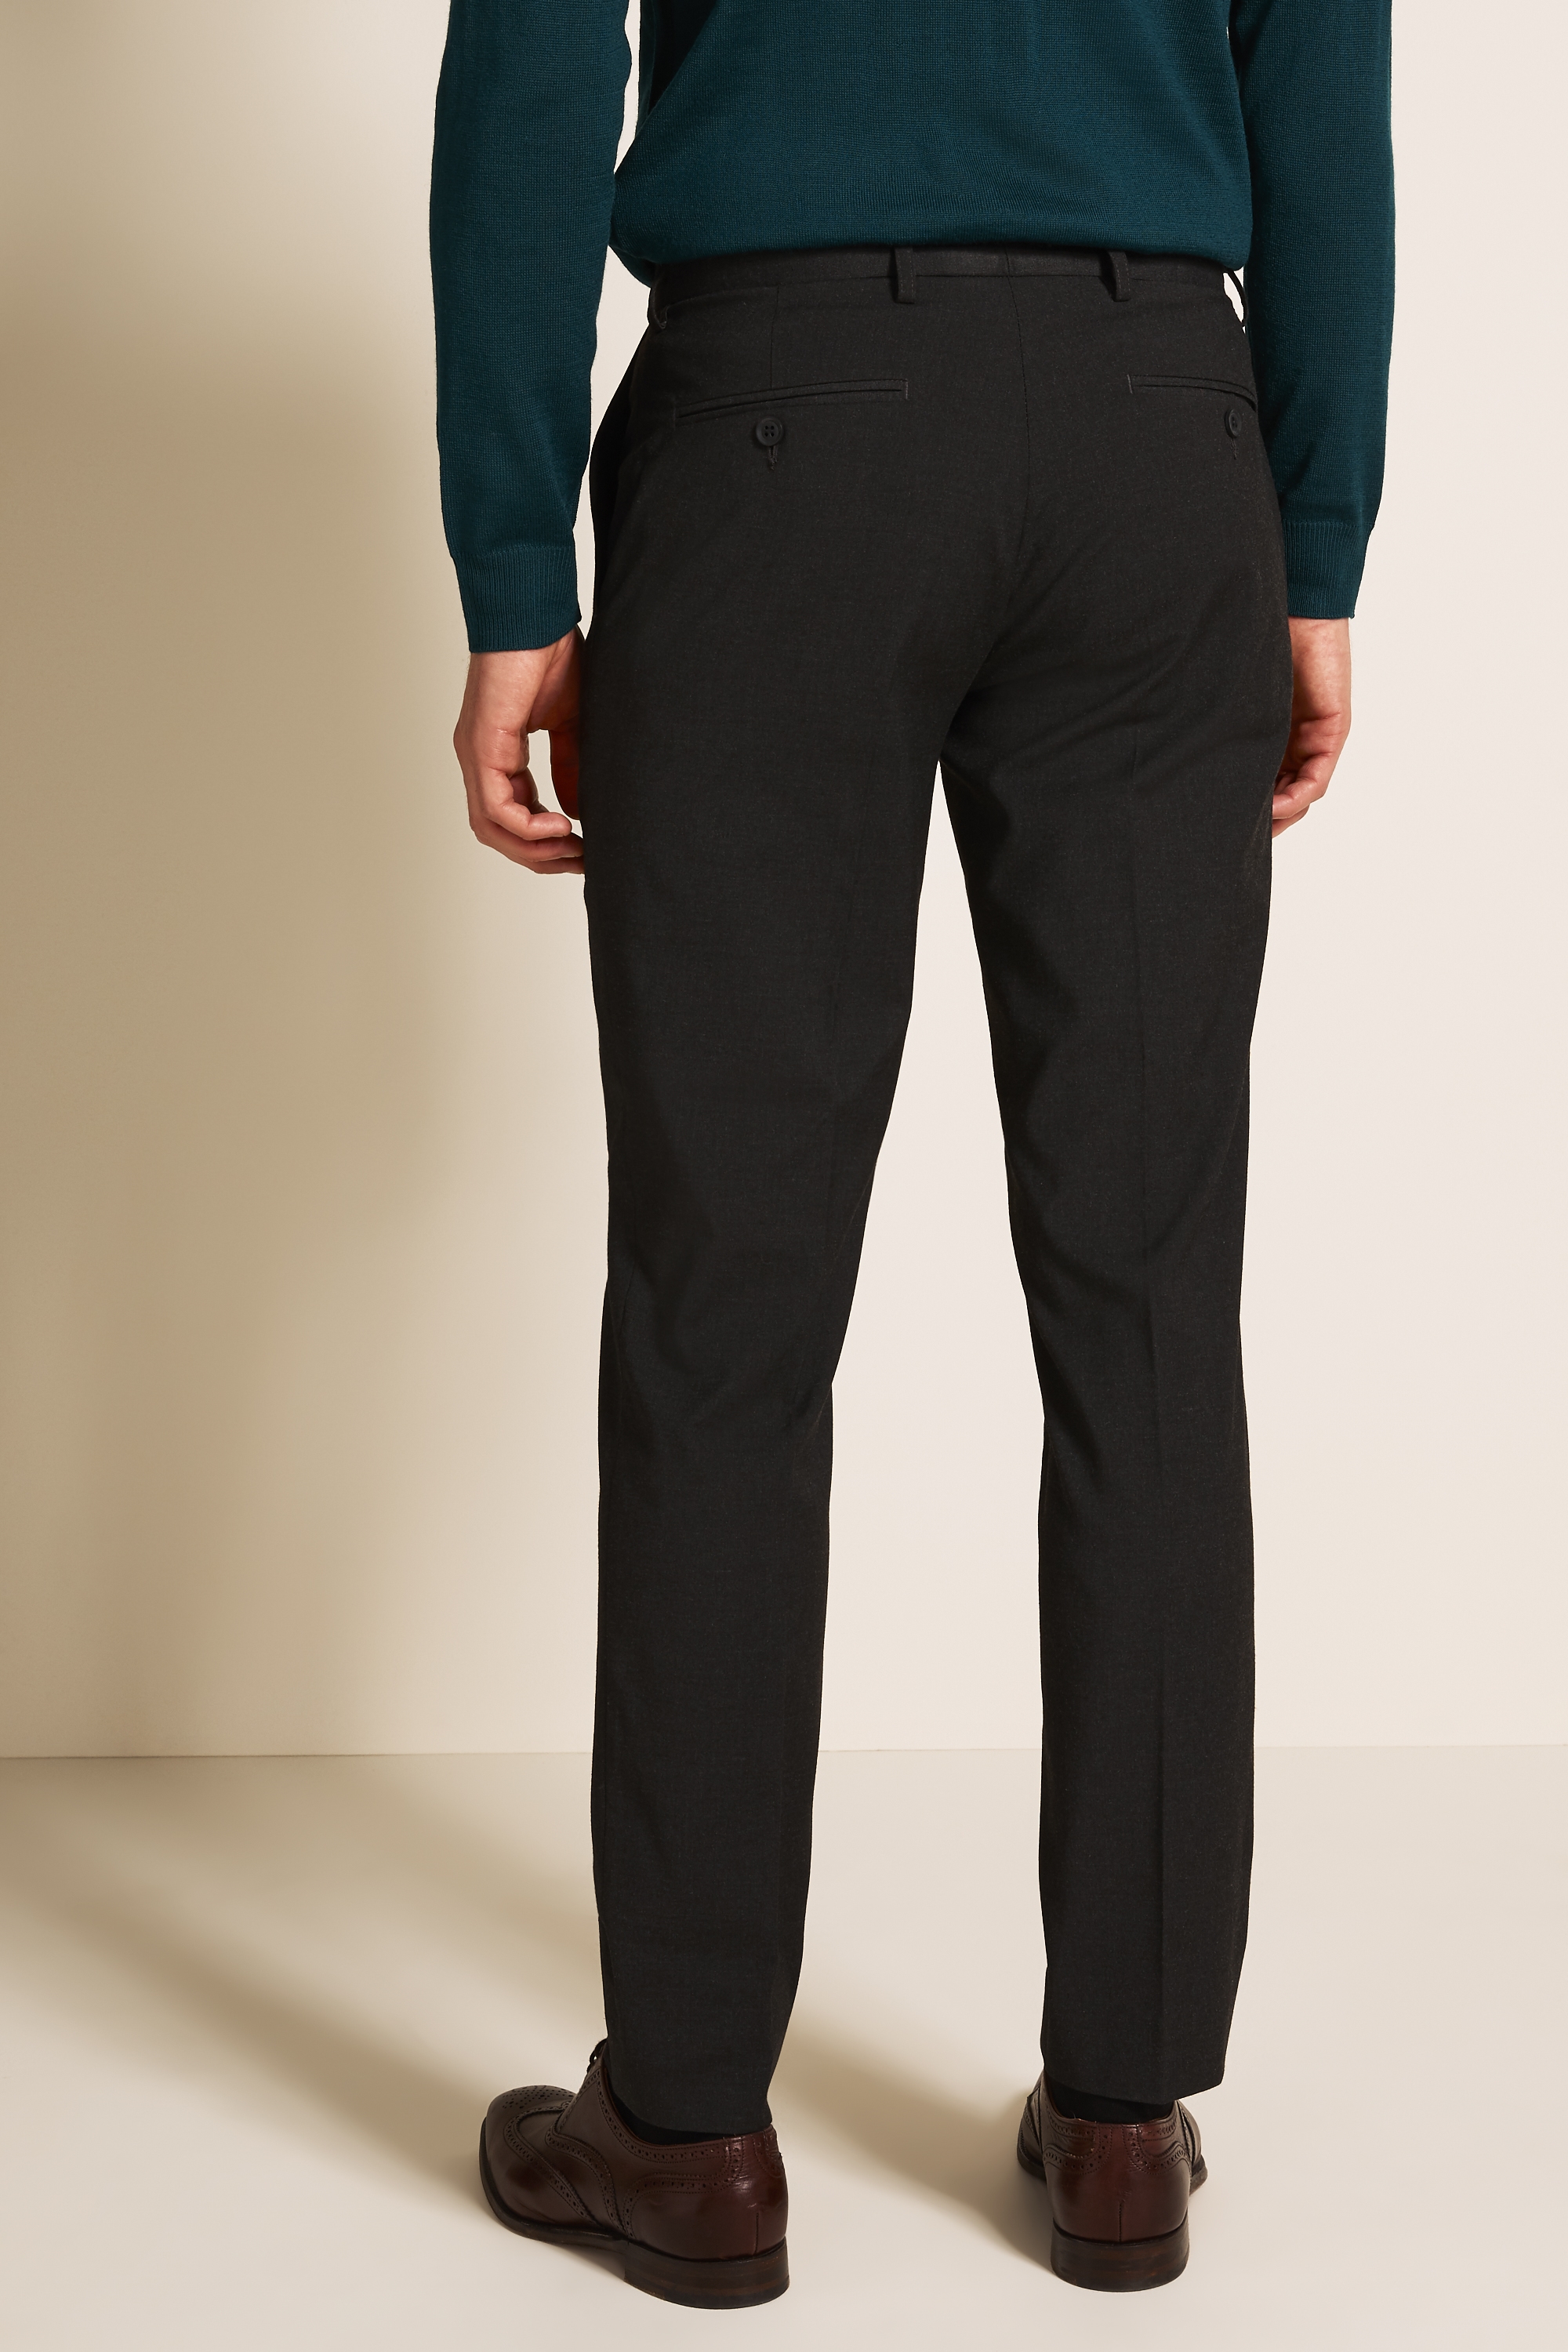 Tailored Fit Charcoal Stretch Trousers | Buy Online at Moss